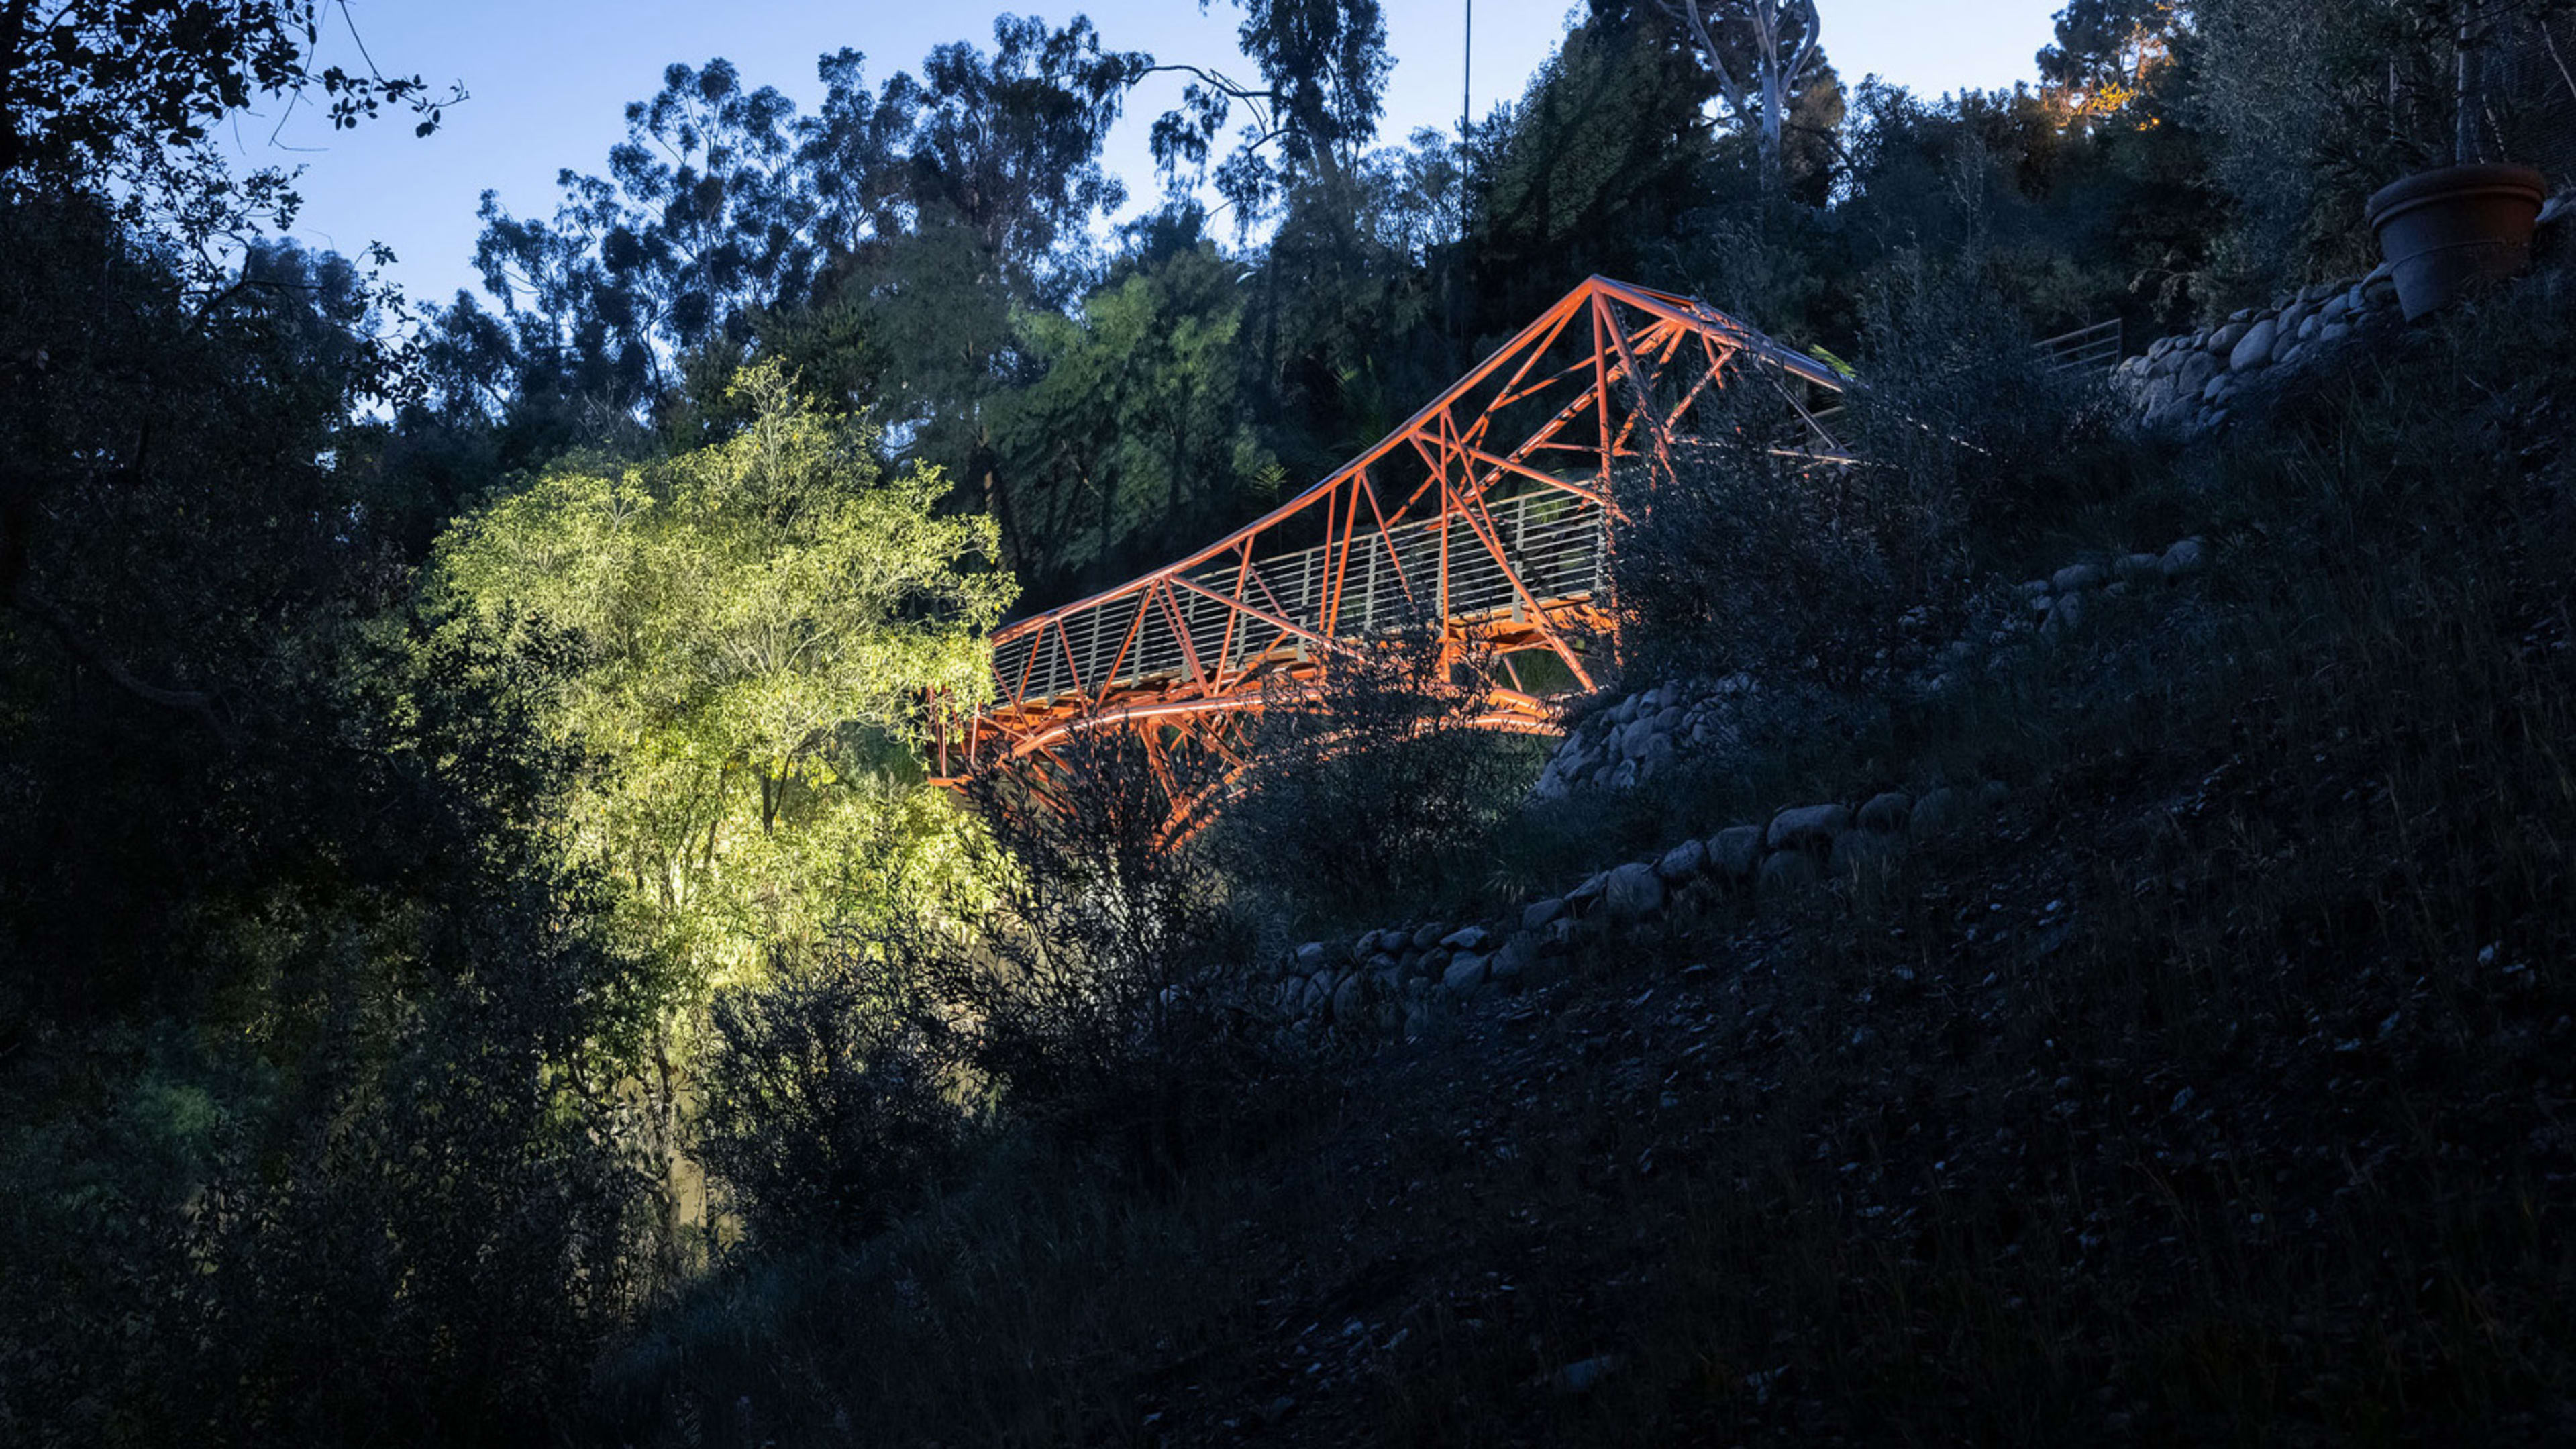 This incredible bridge was designed by students—and built by robots